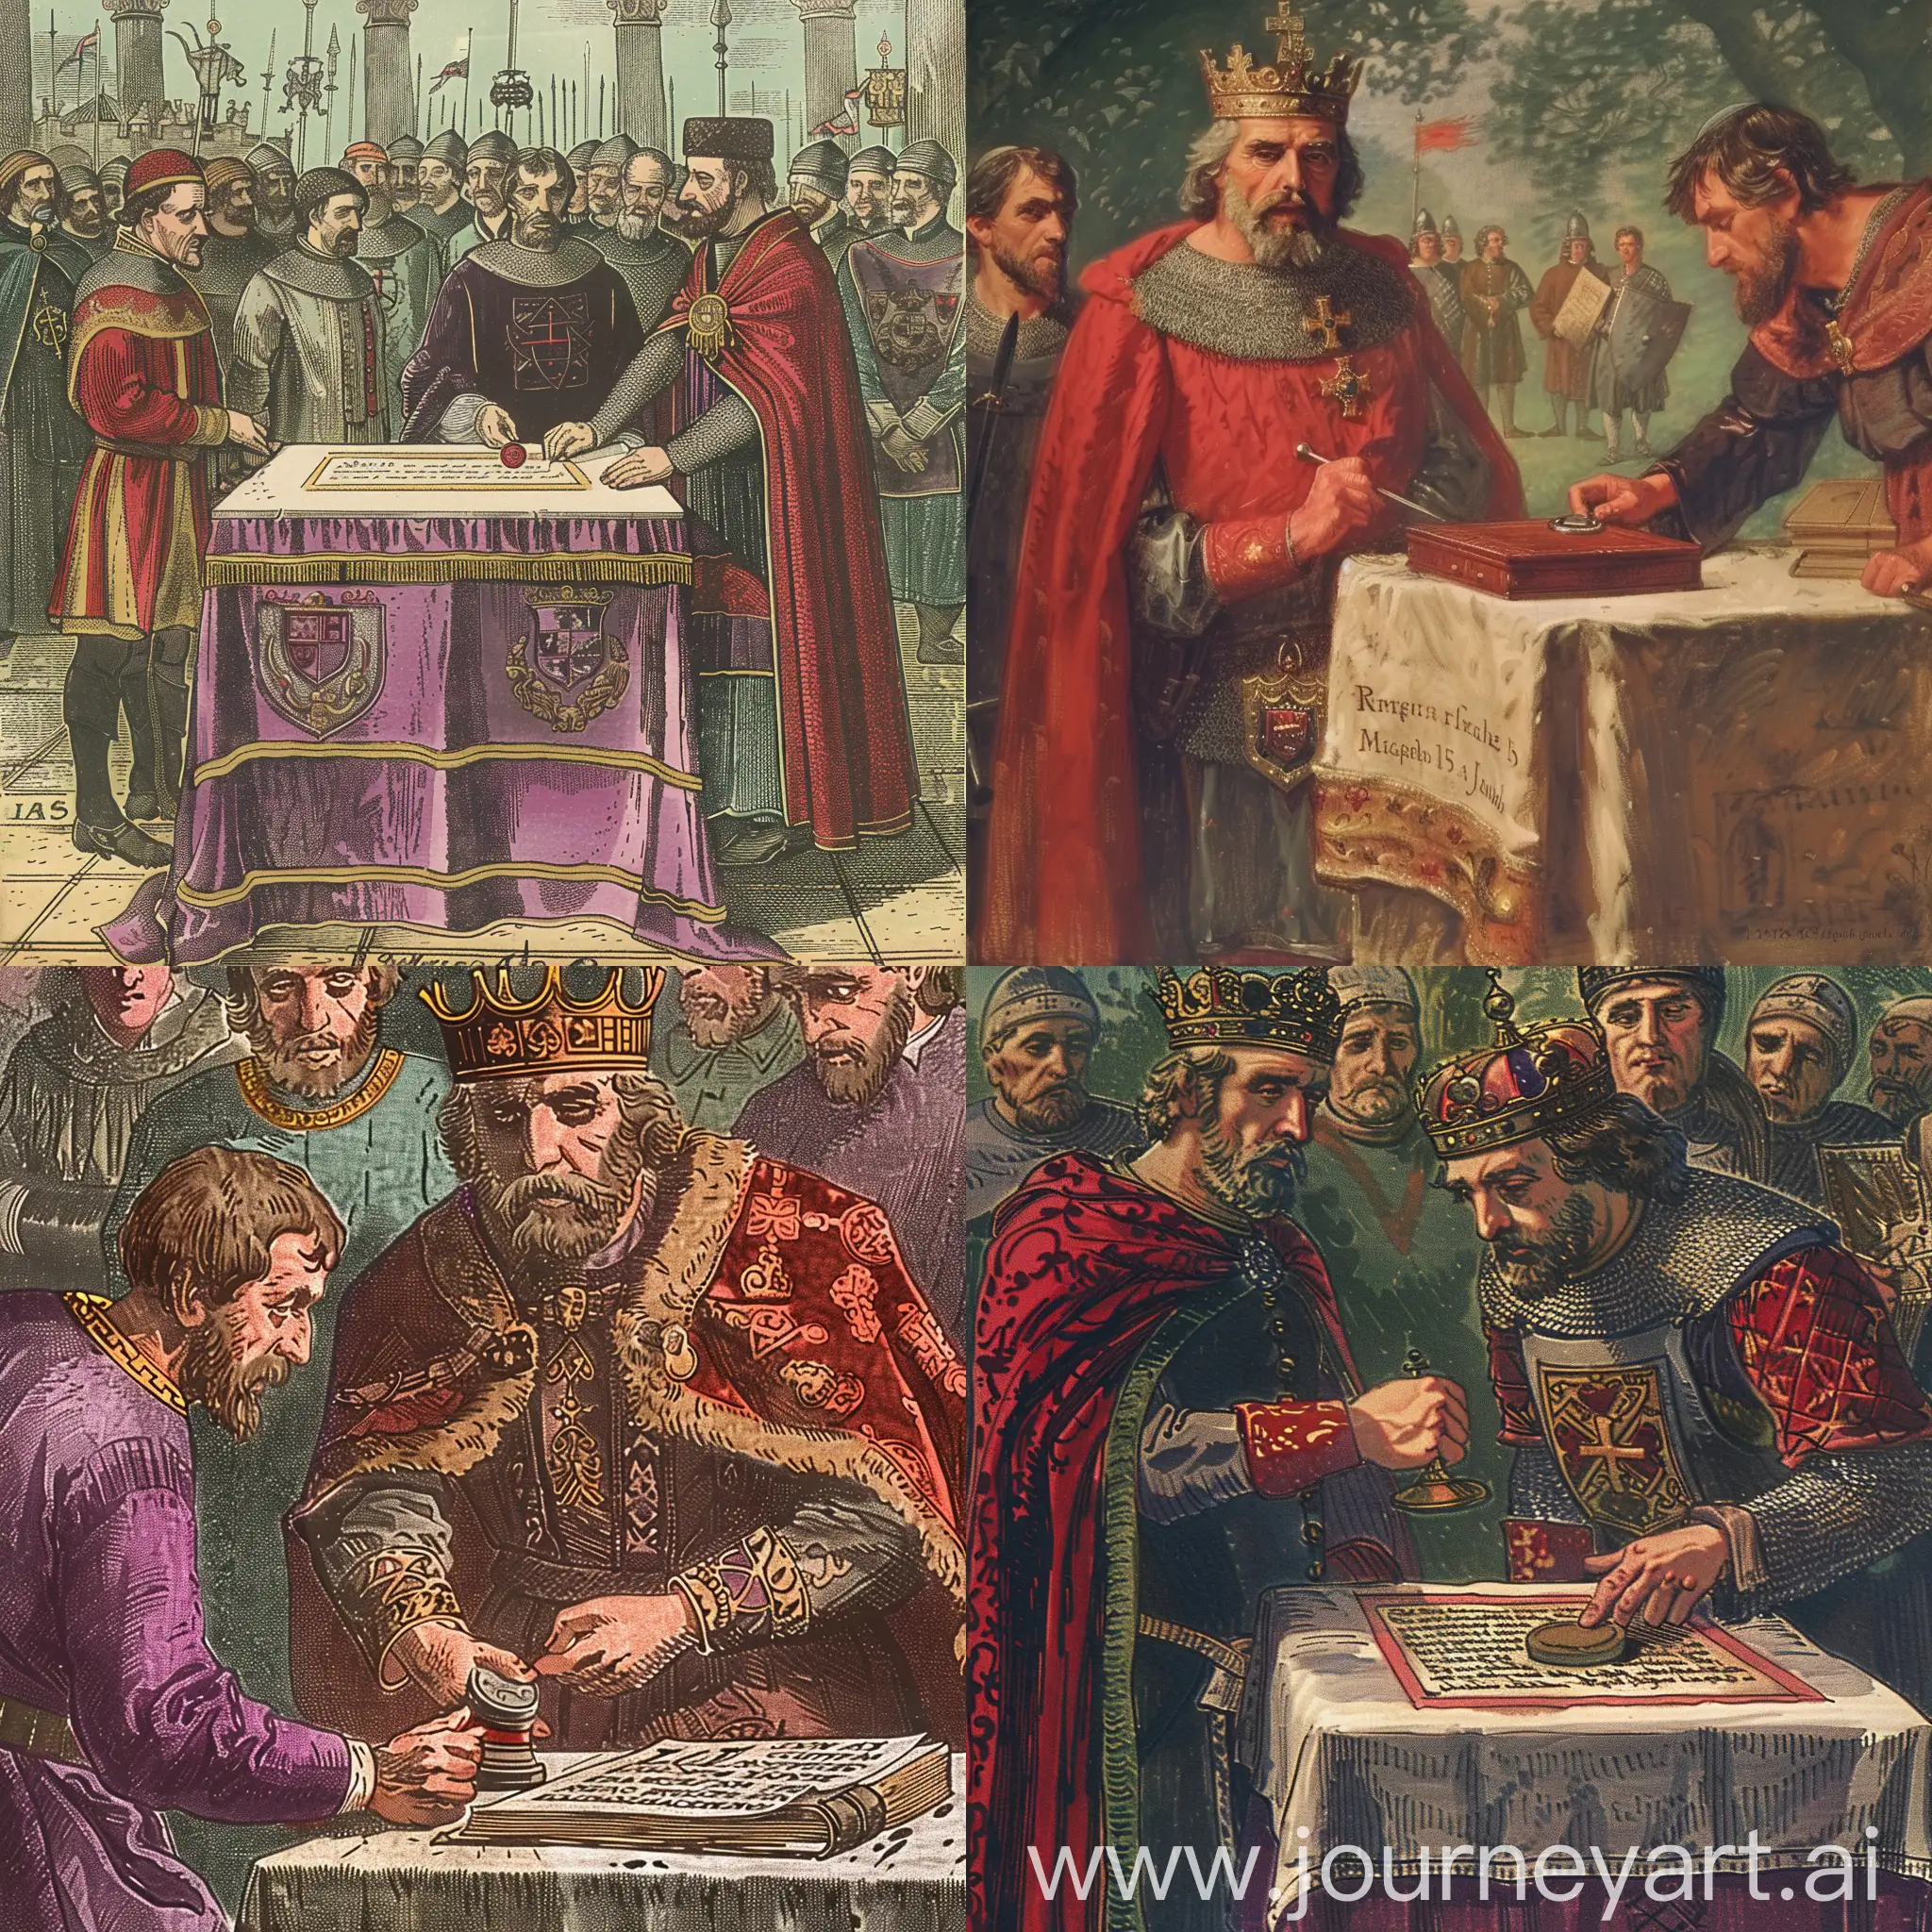 an image depicting King John of England reluctantly affixing his seal to the Magna Carta on June 15, 1215, at Runnymede